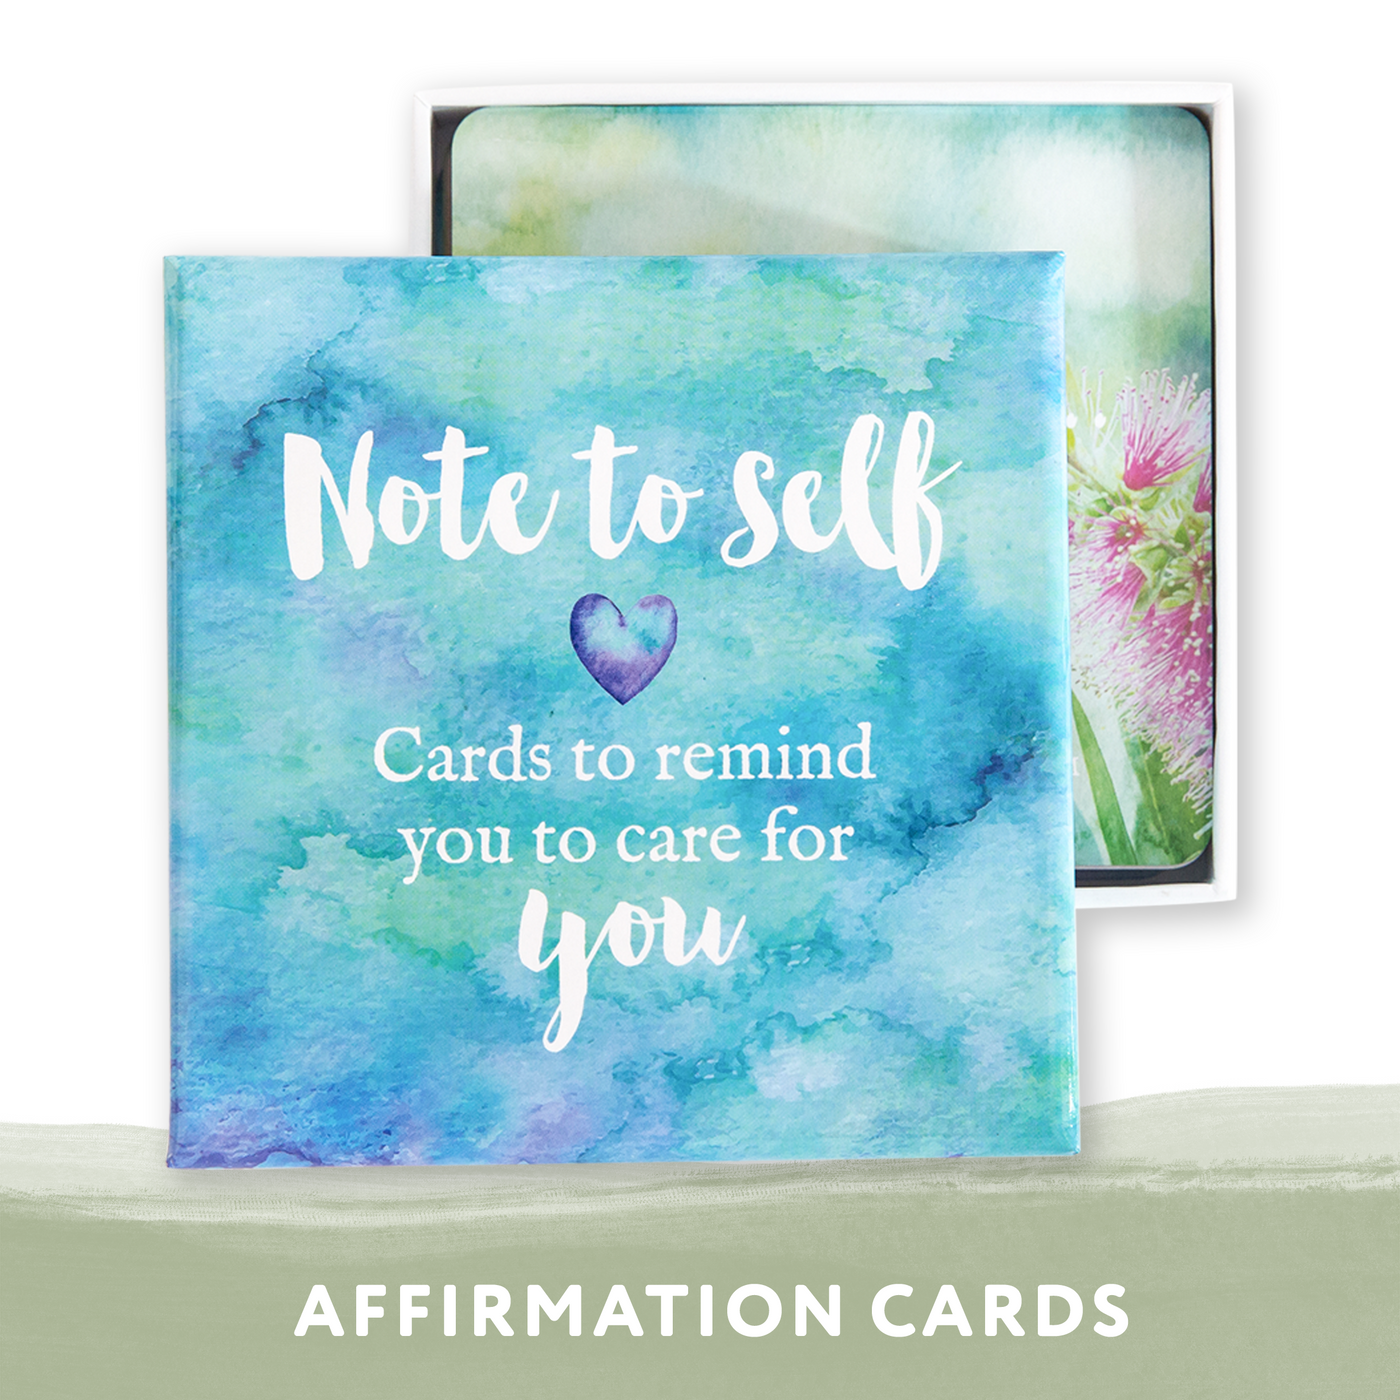 Note to Self - Affirmation Cards